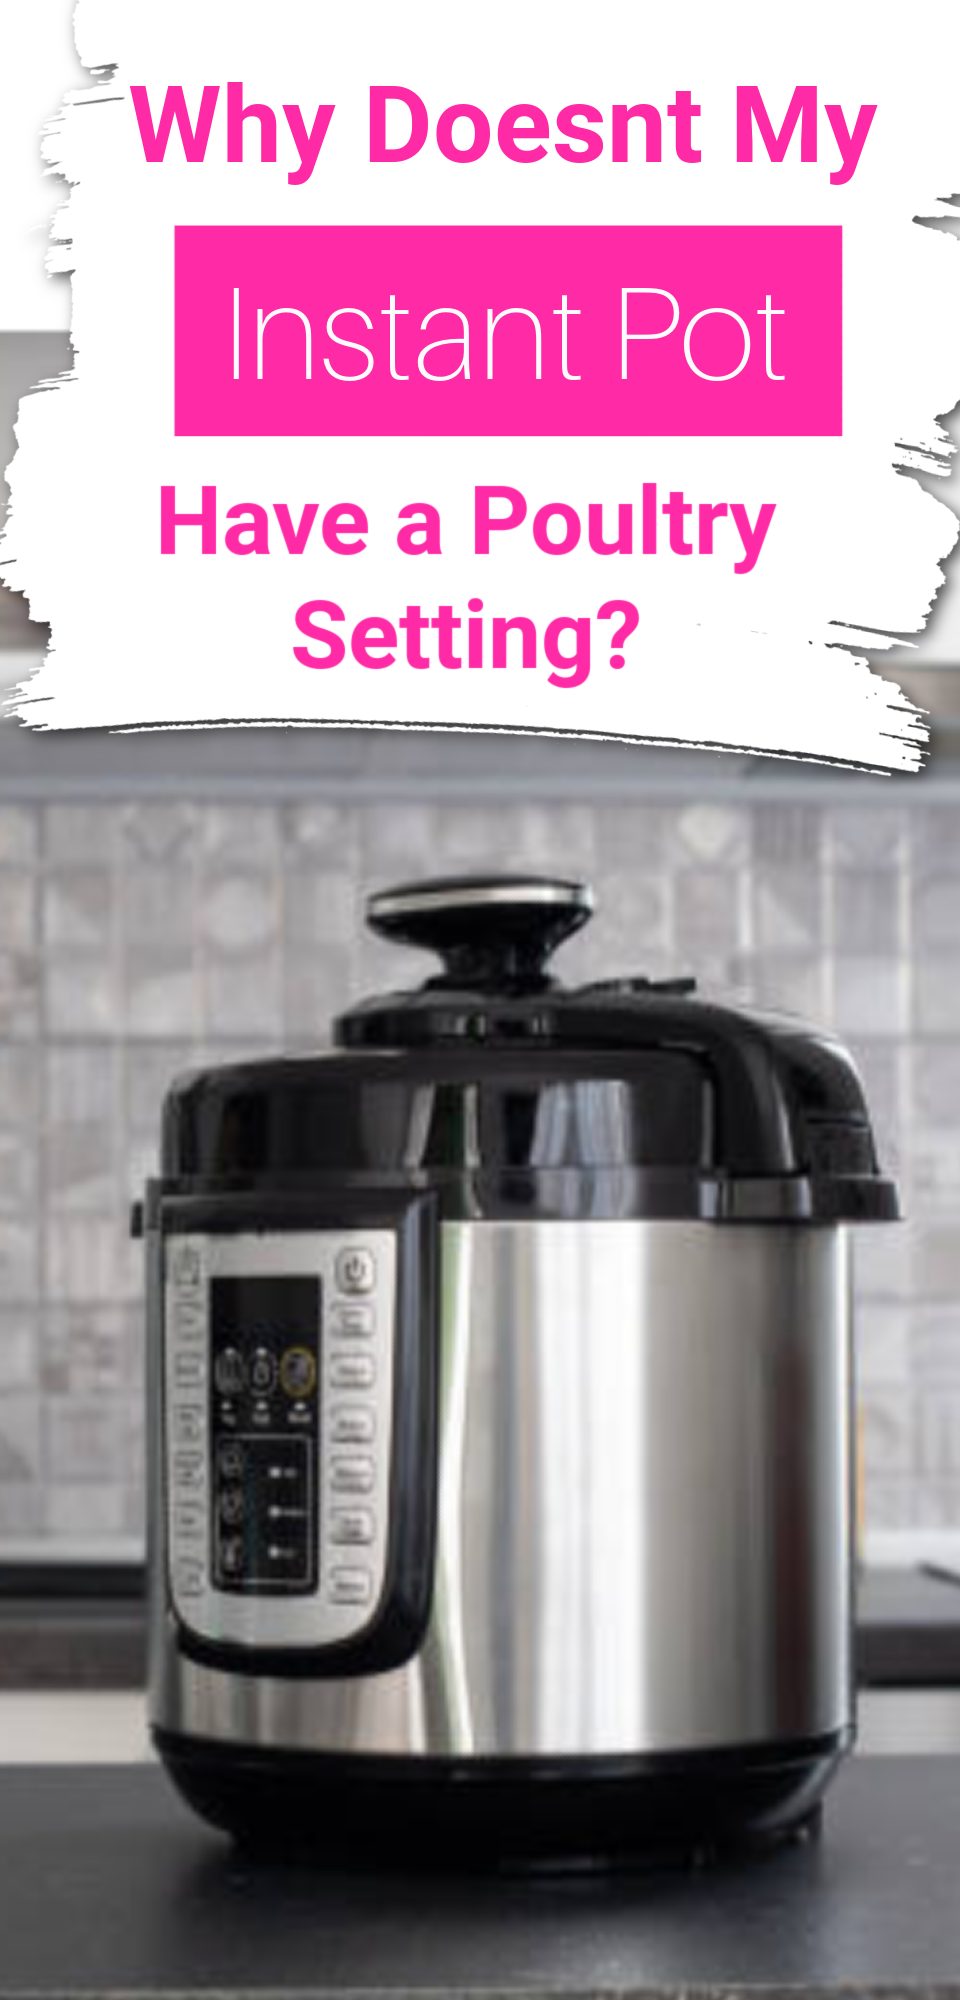 Chances are you LOVE your Instant Pot! It is such a useful appliance that makes life easier. But not all models are created equal and you may notice that your Instant Pot doesn't have a poultry setting. If this is the case keep reading to learn more.